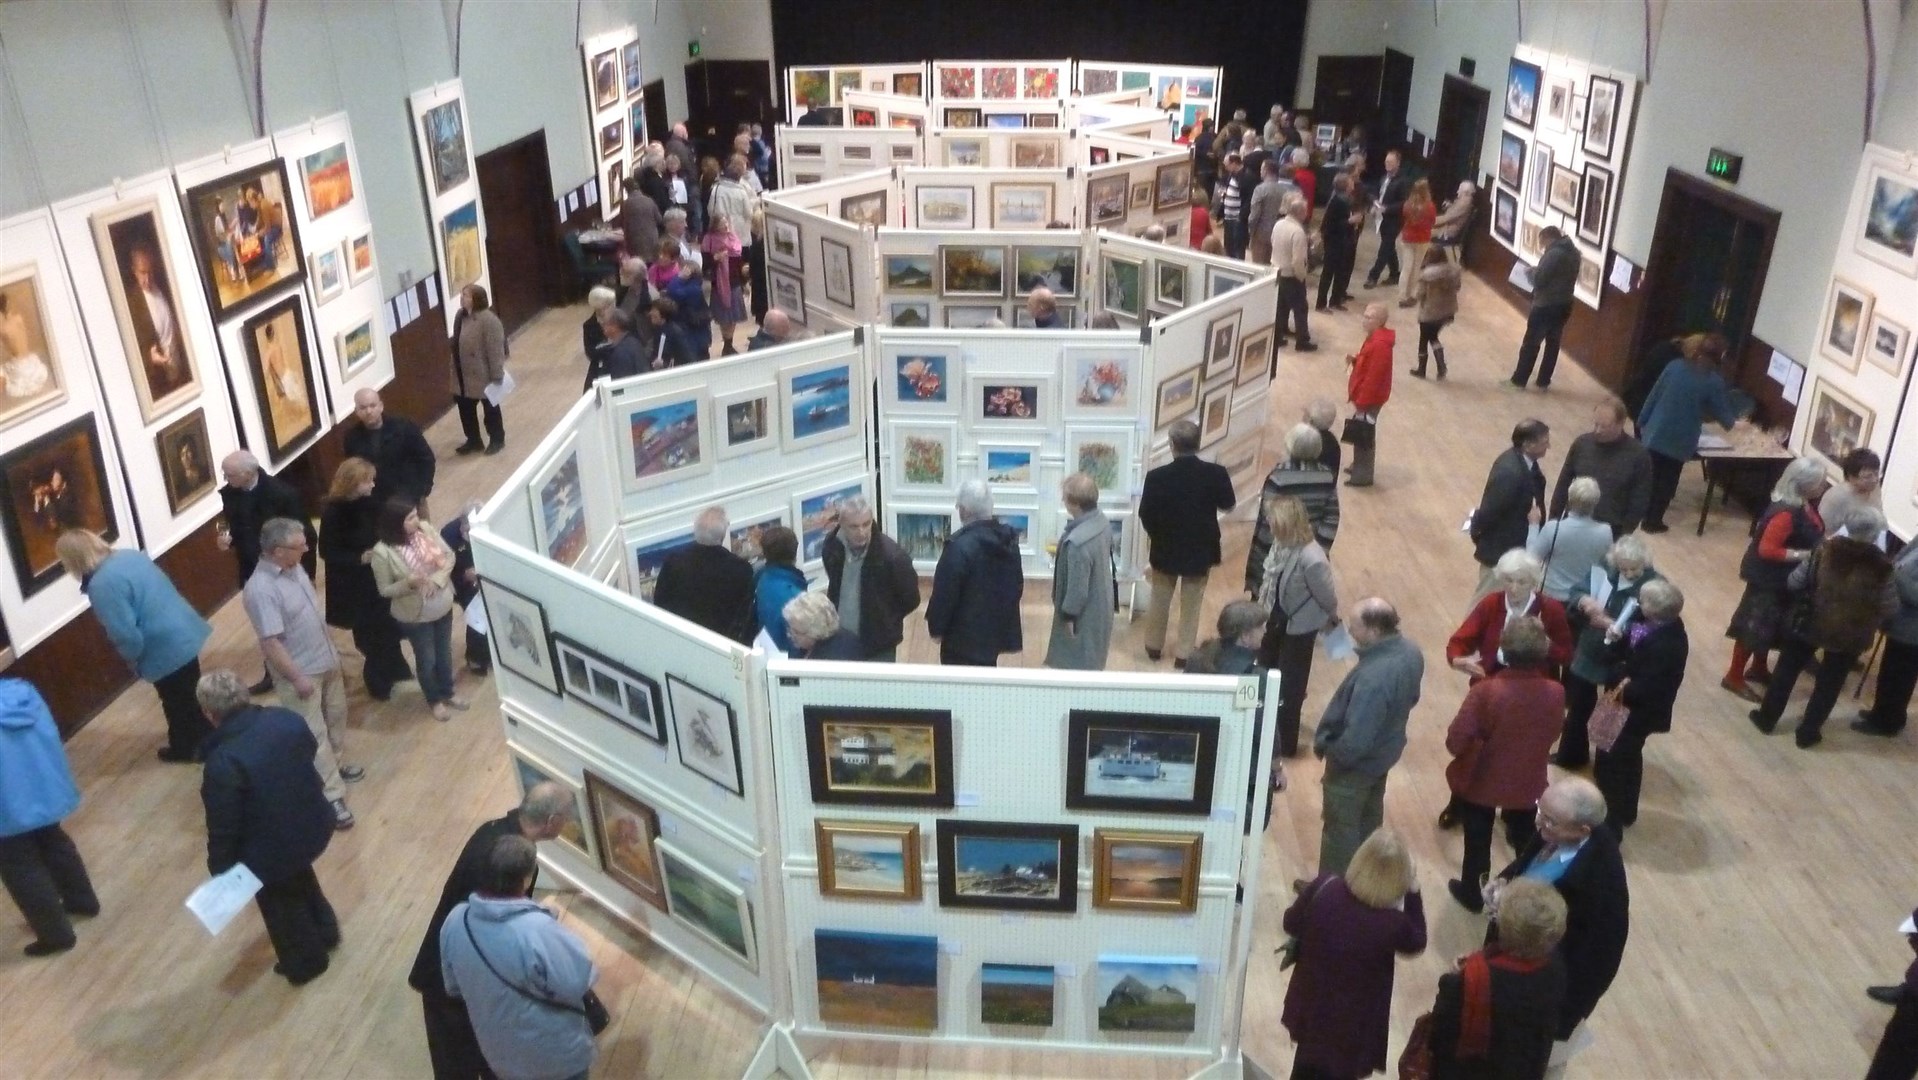 The art fair has become a firm favourite on the Ross-shire calendar. Around 300 pieces of art are likely to be exhibited.